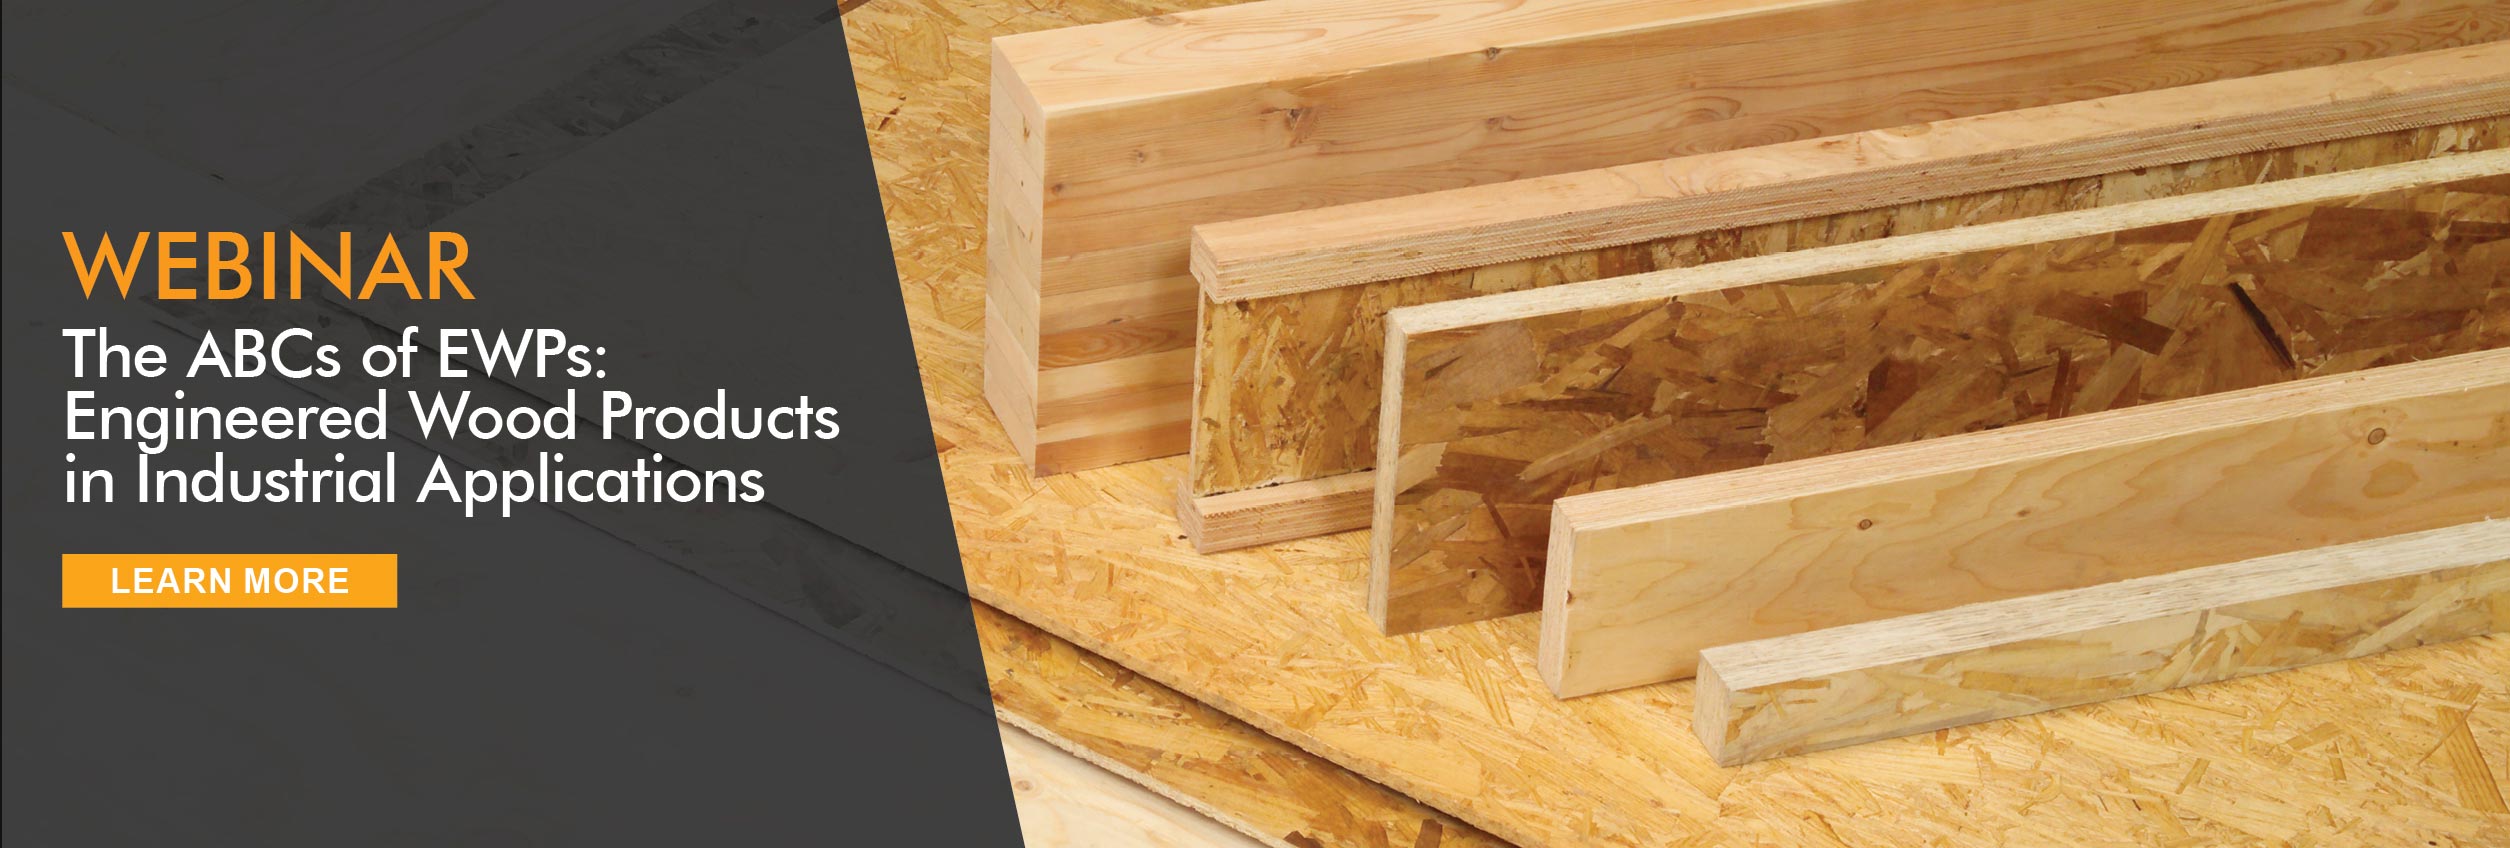 Webinar: The ABCs of Engineered Wood Products in Industrial Applications